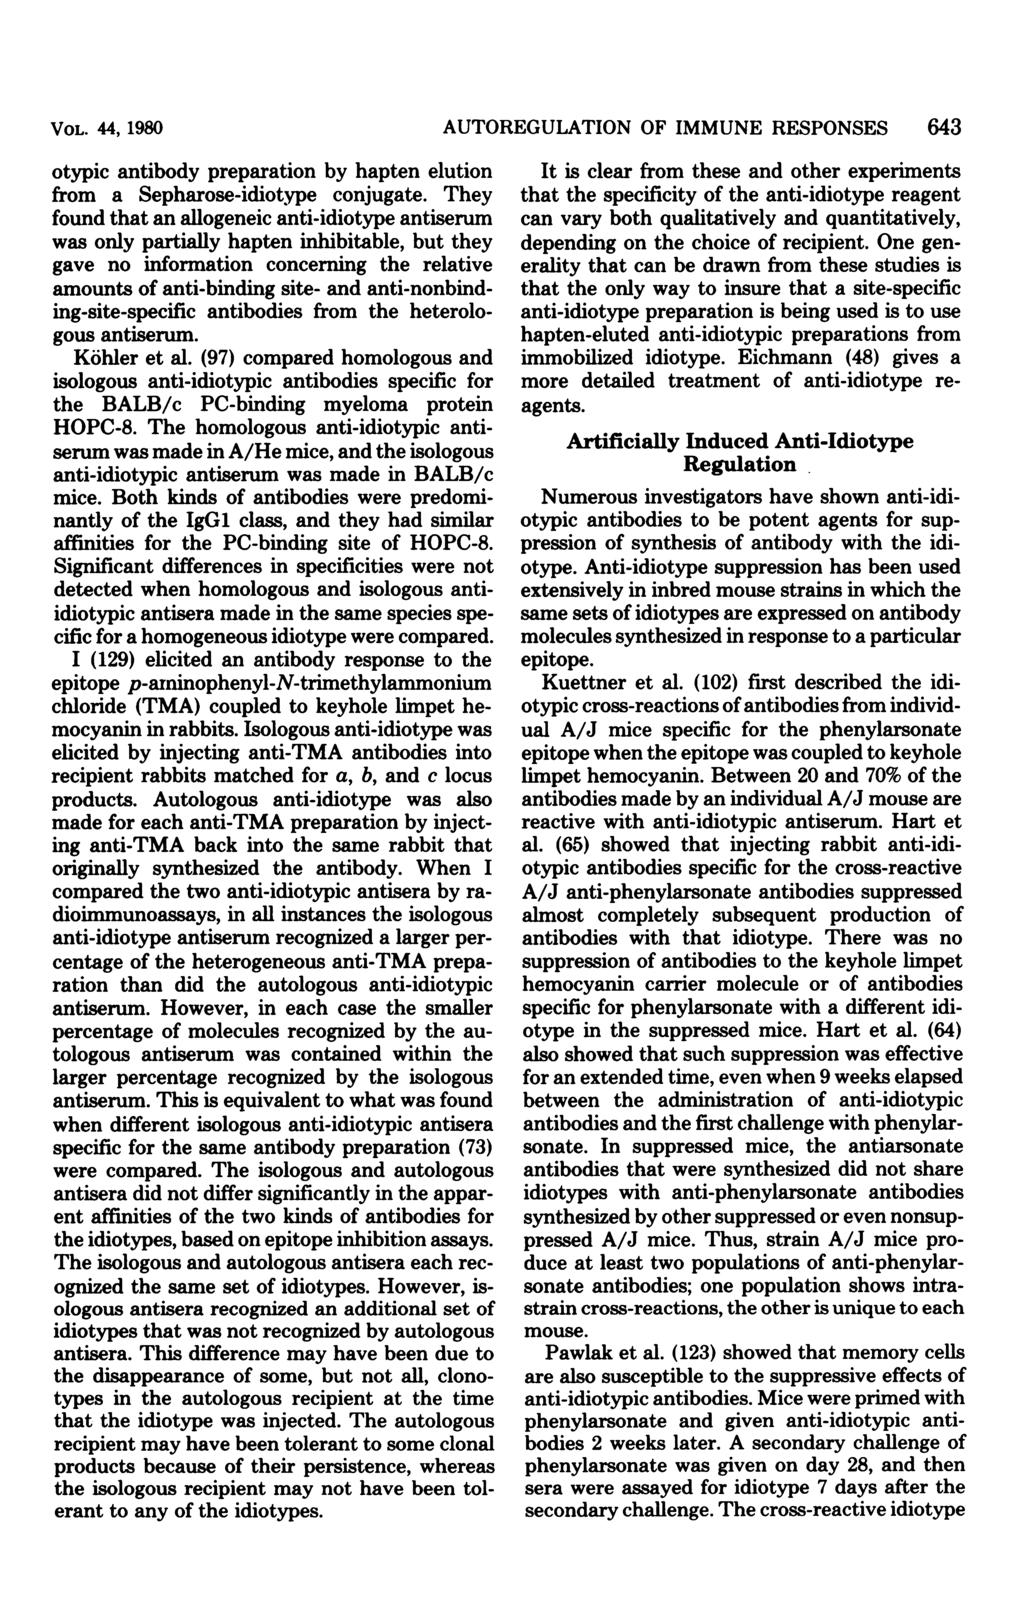 VOL. 44, 1980 otypic antibody preparation by hapten elution from a Sepharose-idiotype conjugate.